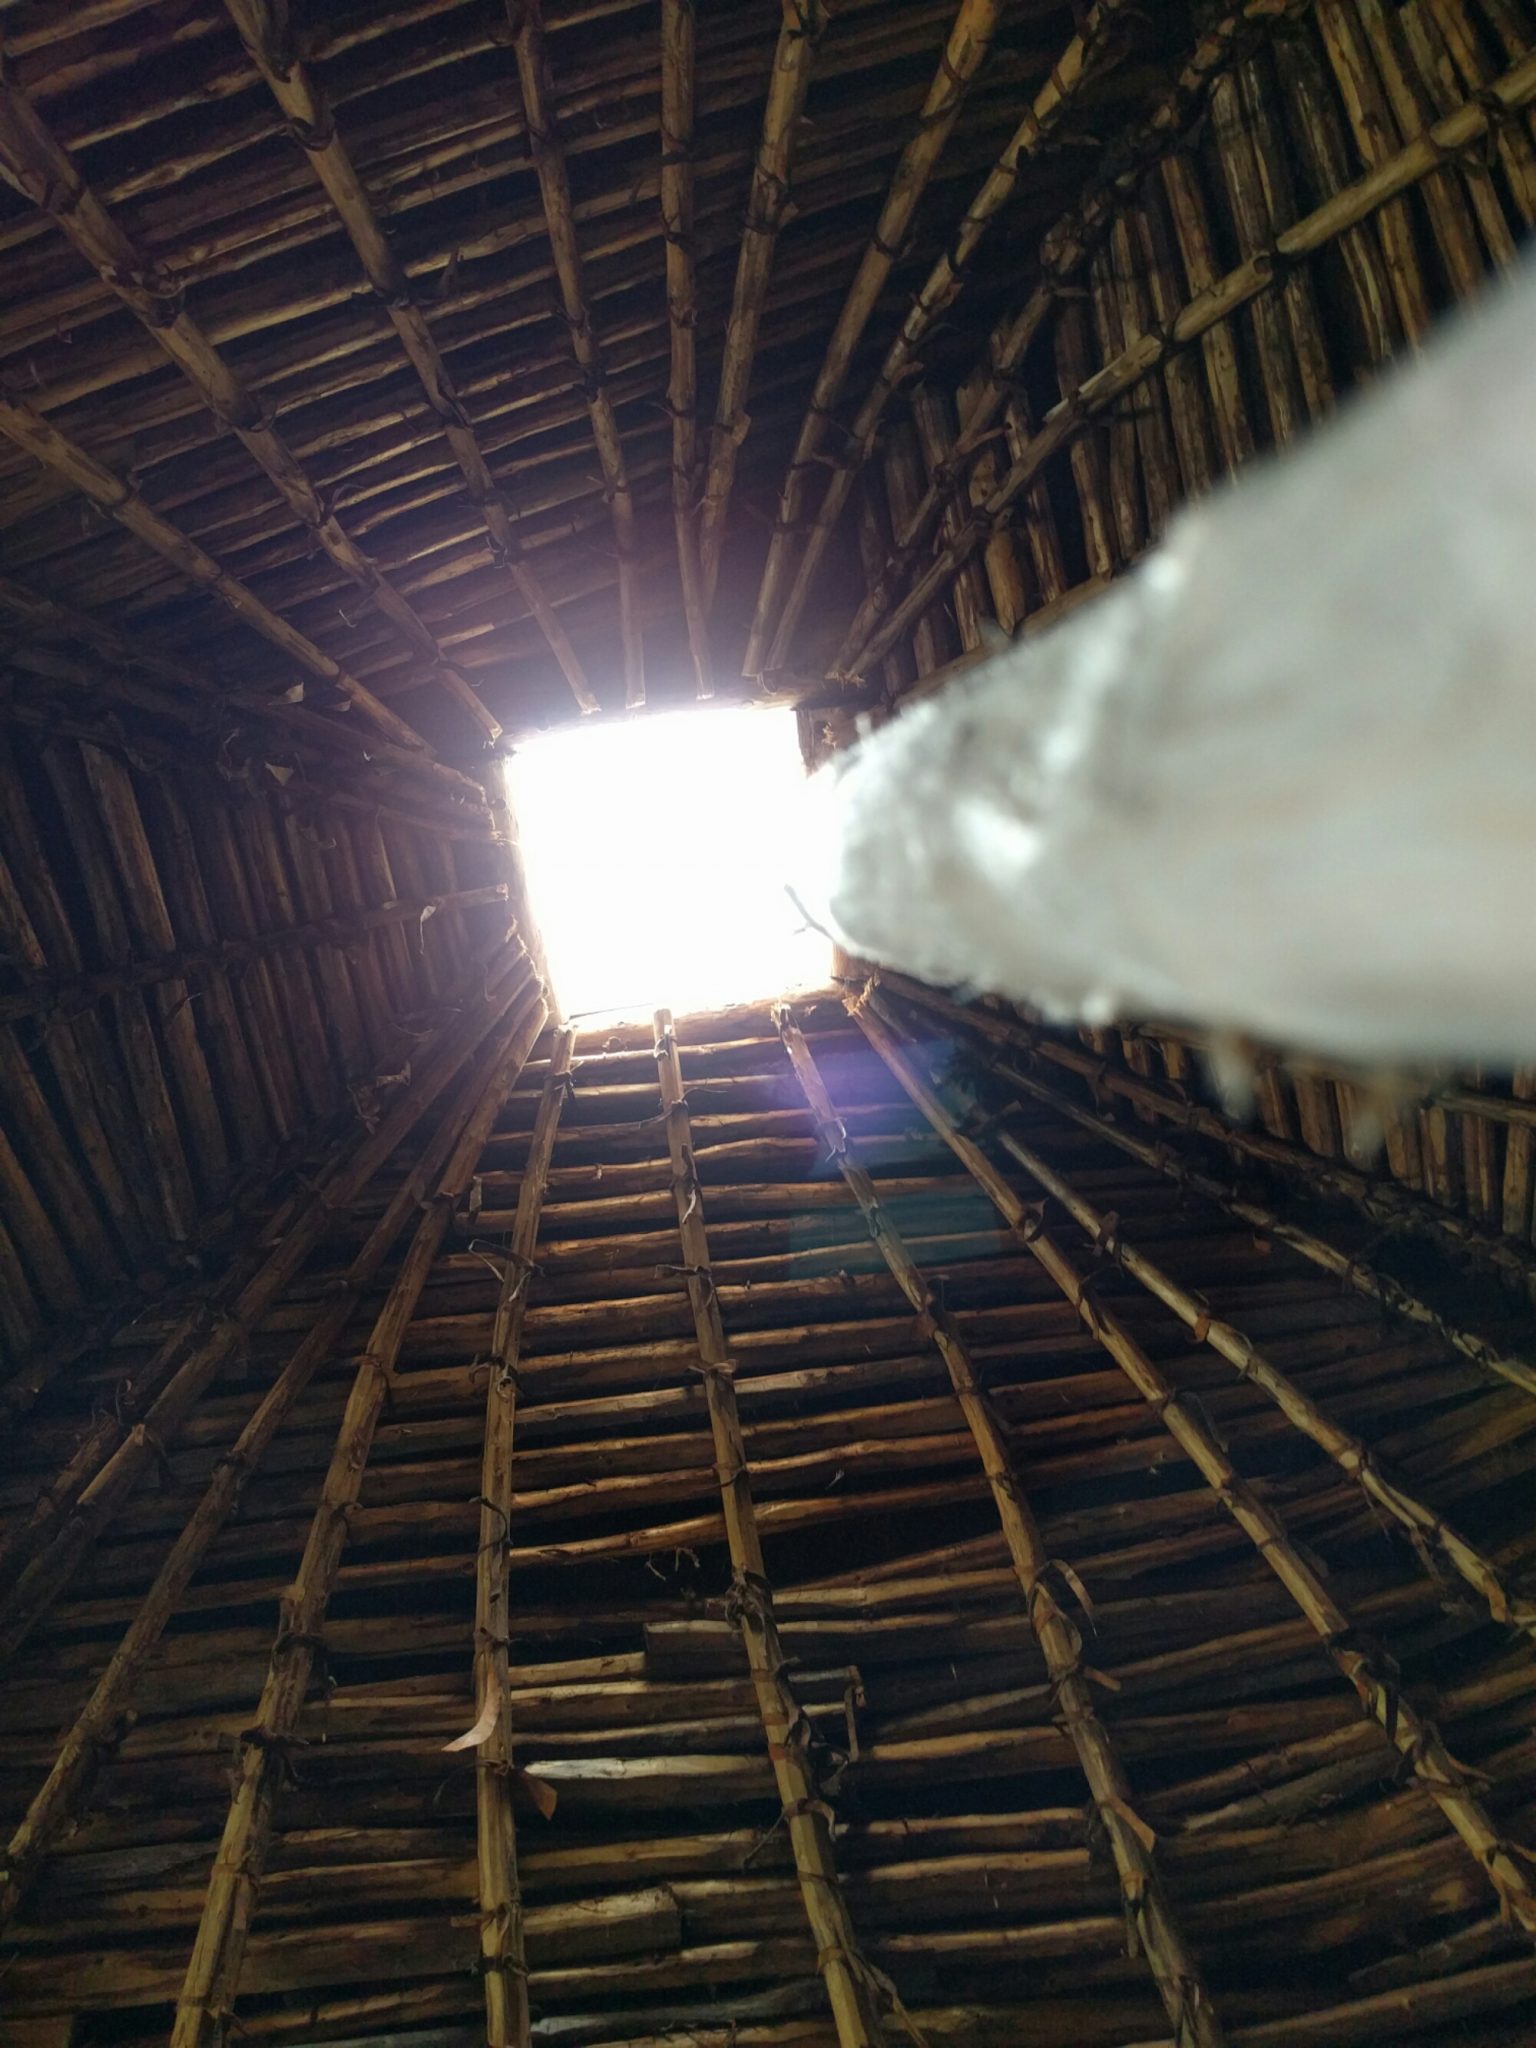 Inside the Viking structures